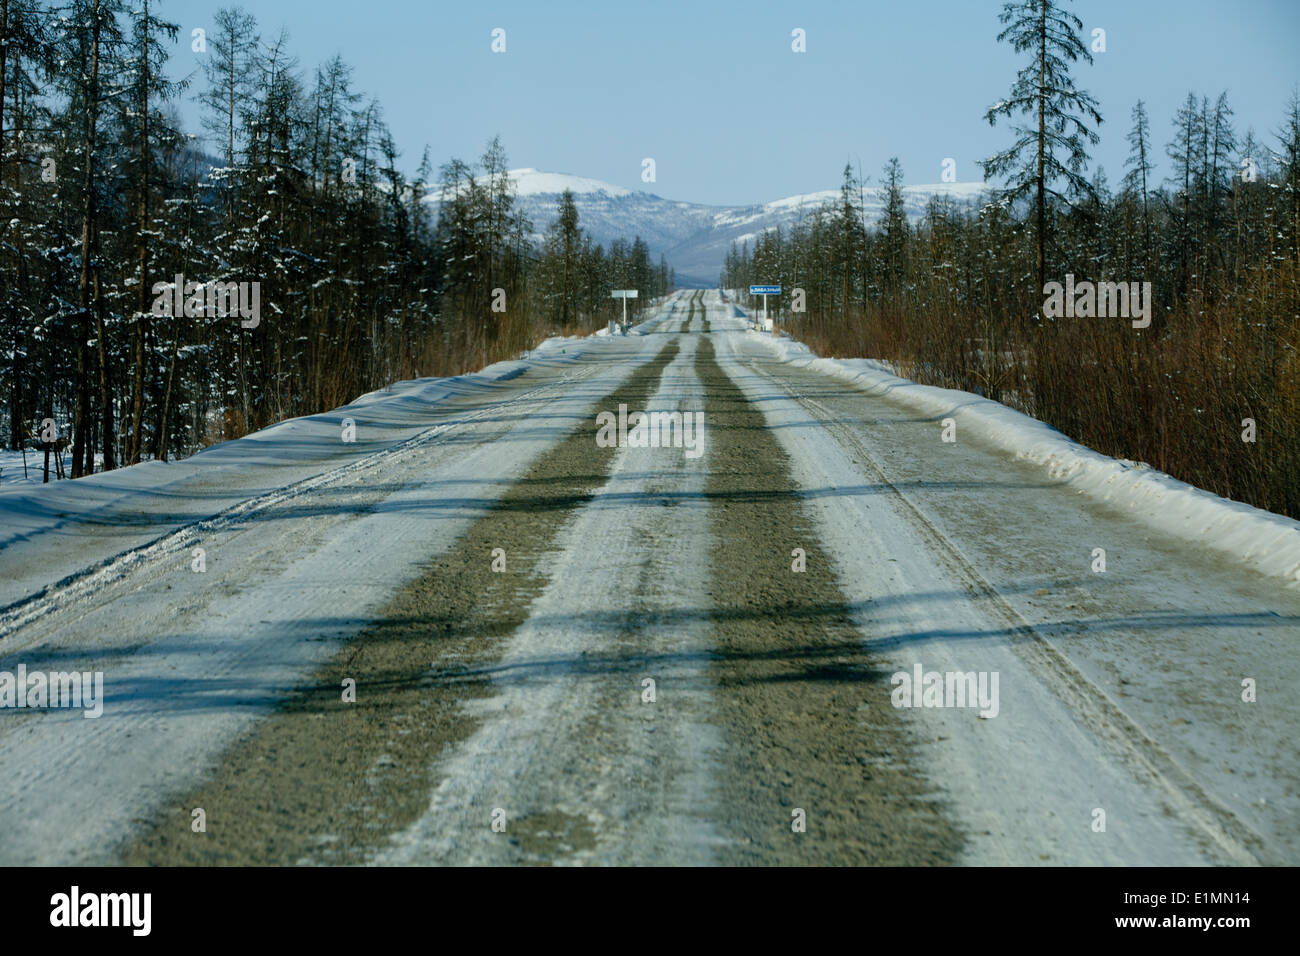 snowy mountains long straight road shadows trees Stock Photo